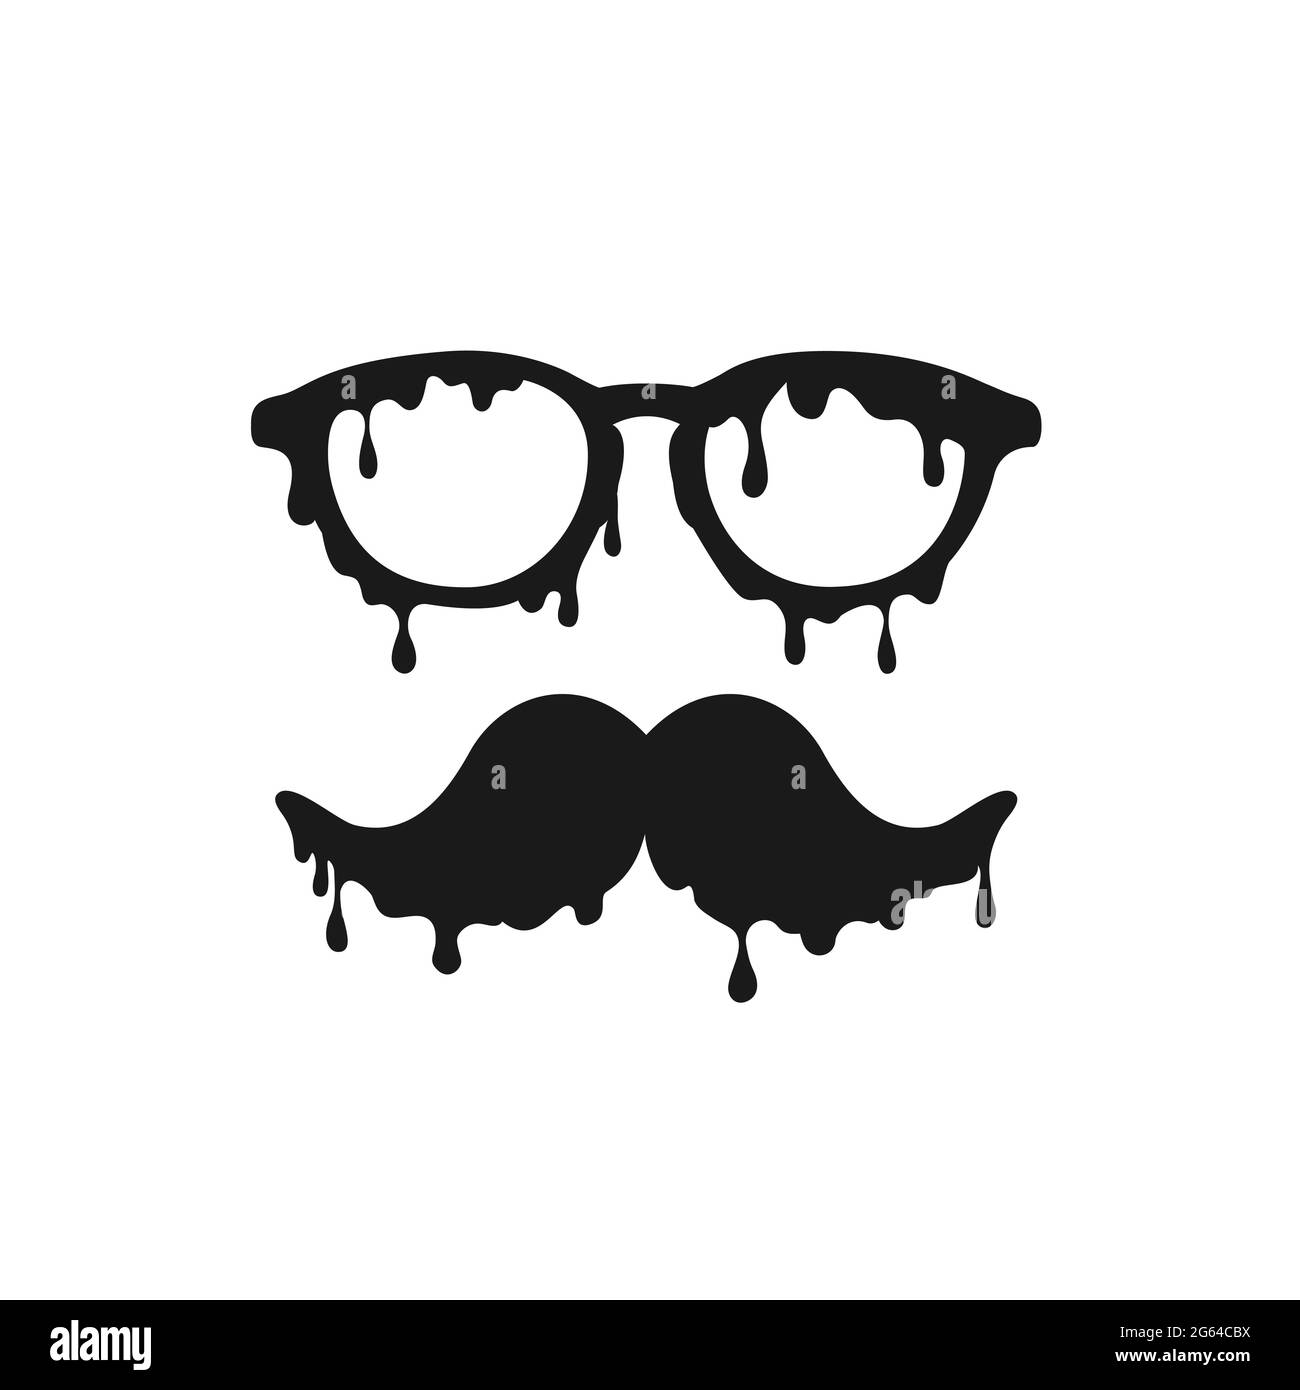 Man glasses and mustache image. Vector illustration. Stock Vector